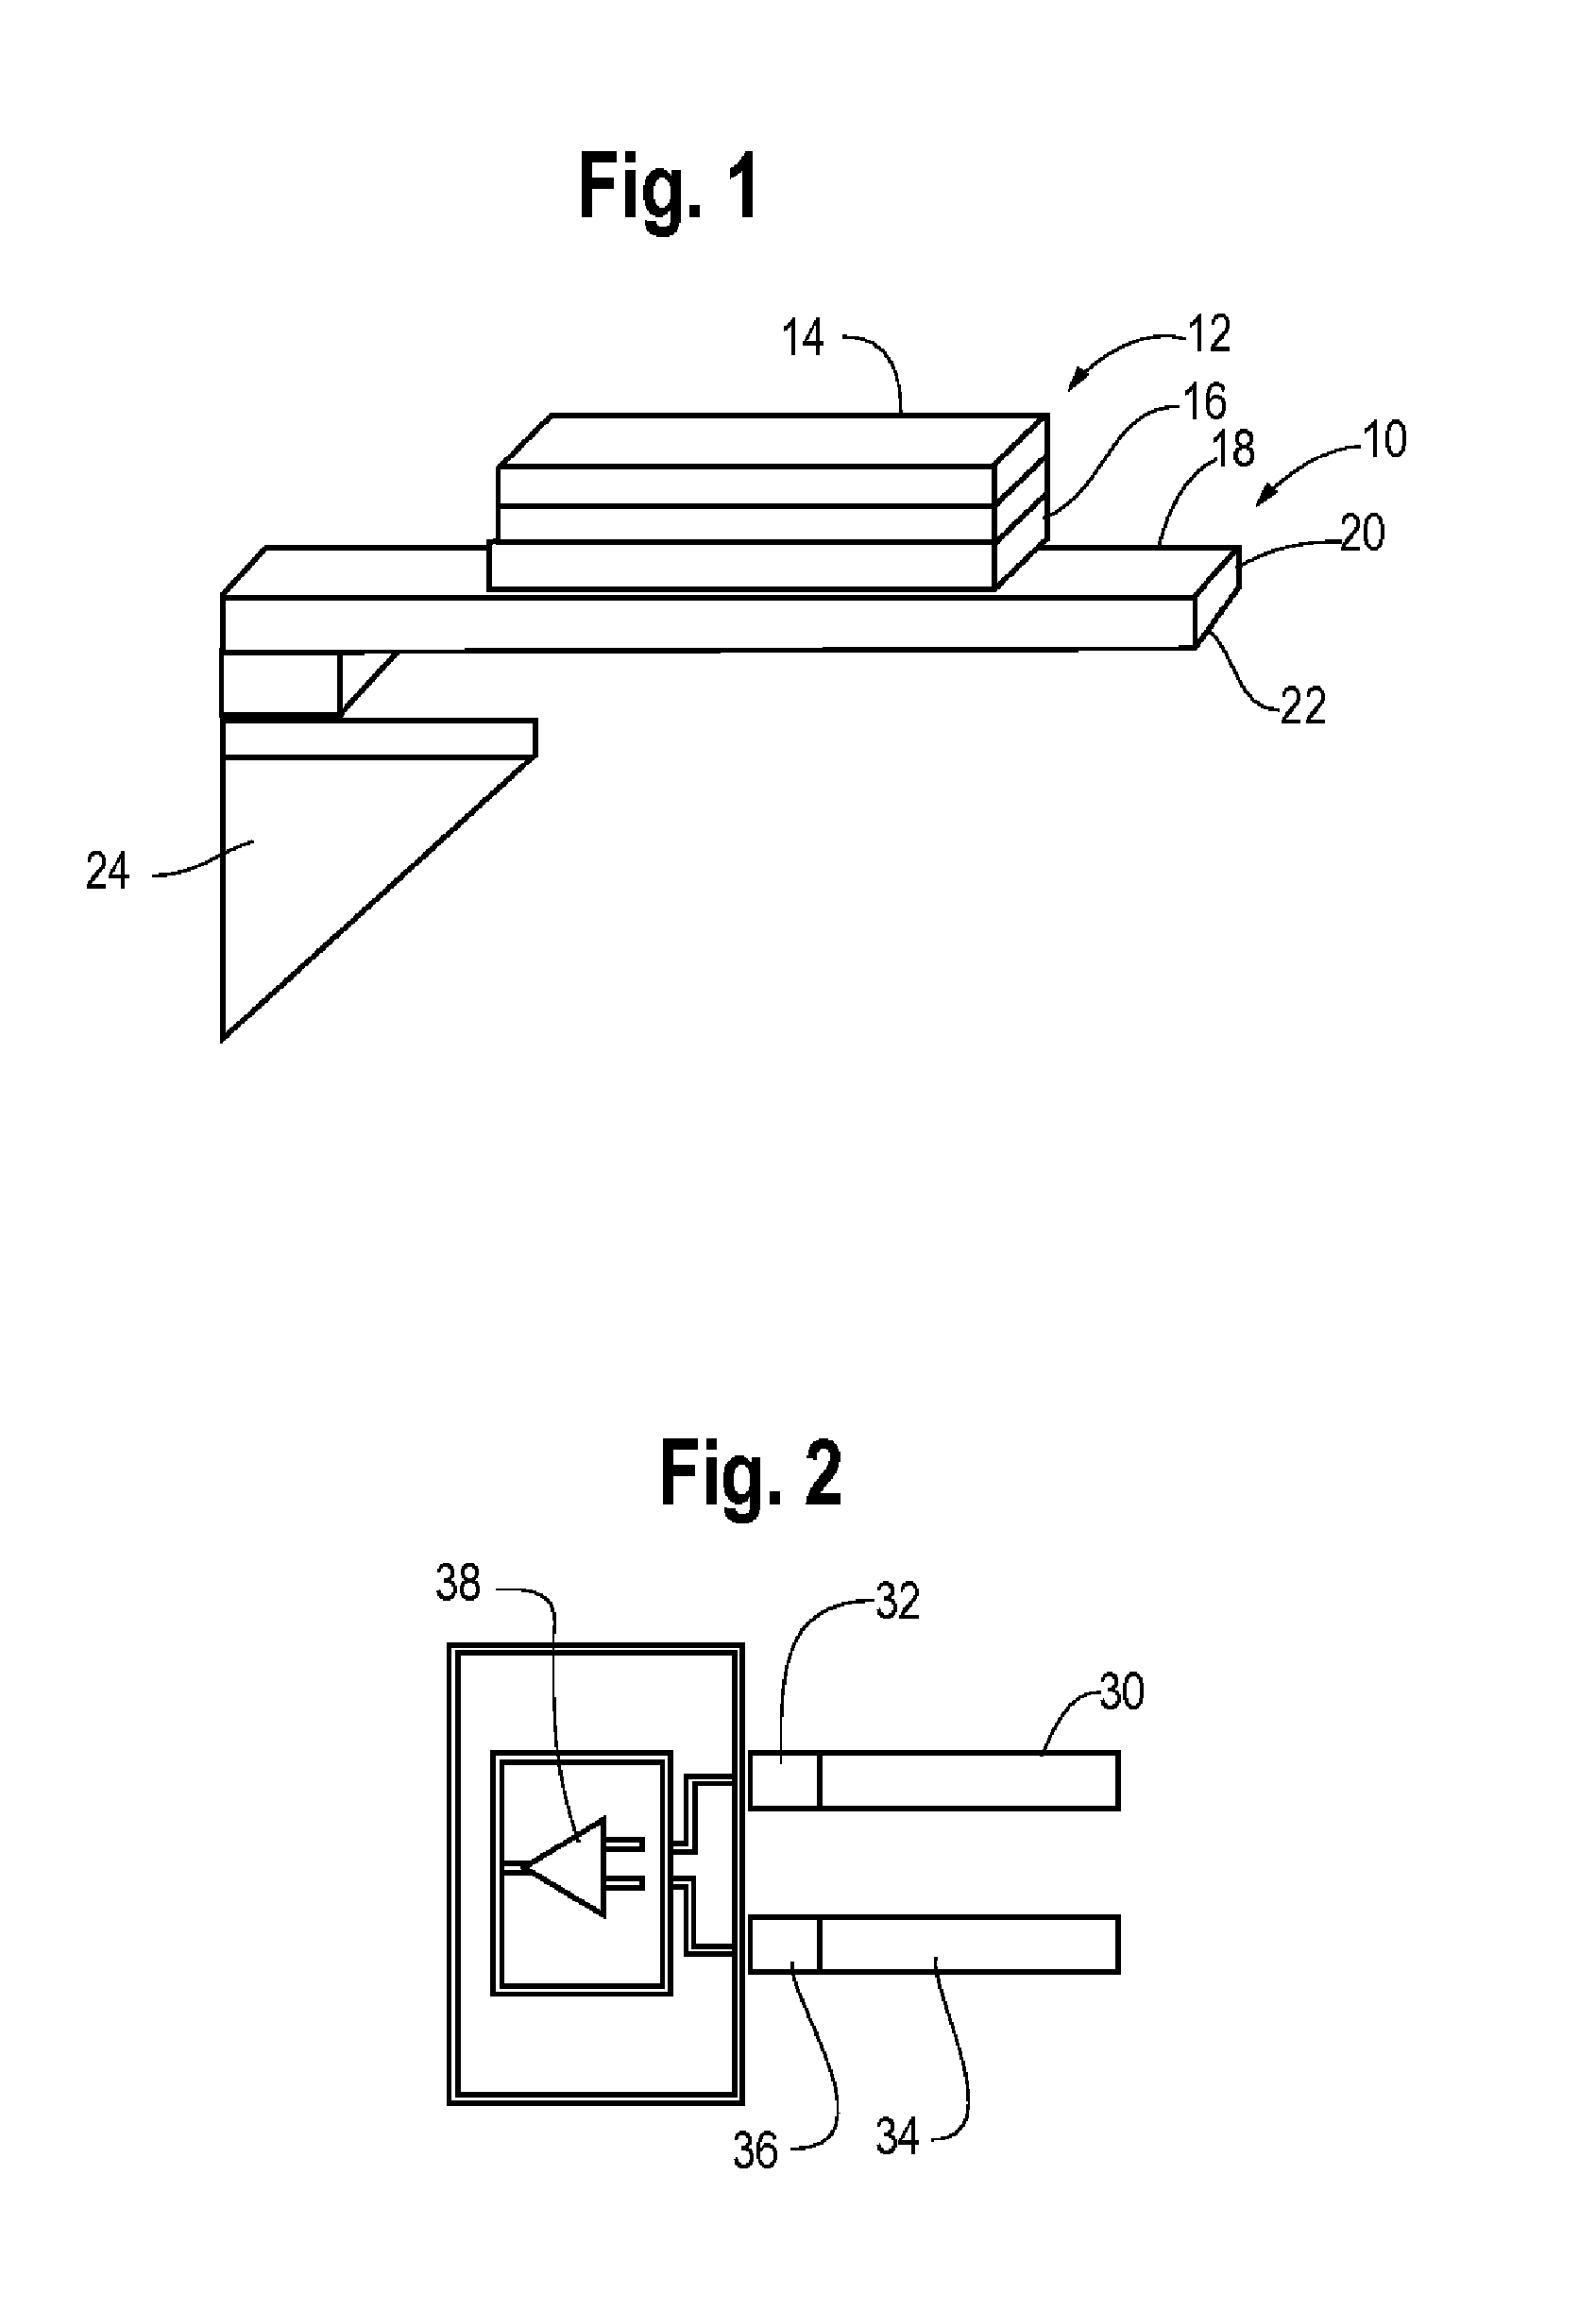 Cascaded mosfet embedded multi-input microcantilever